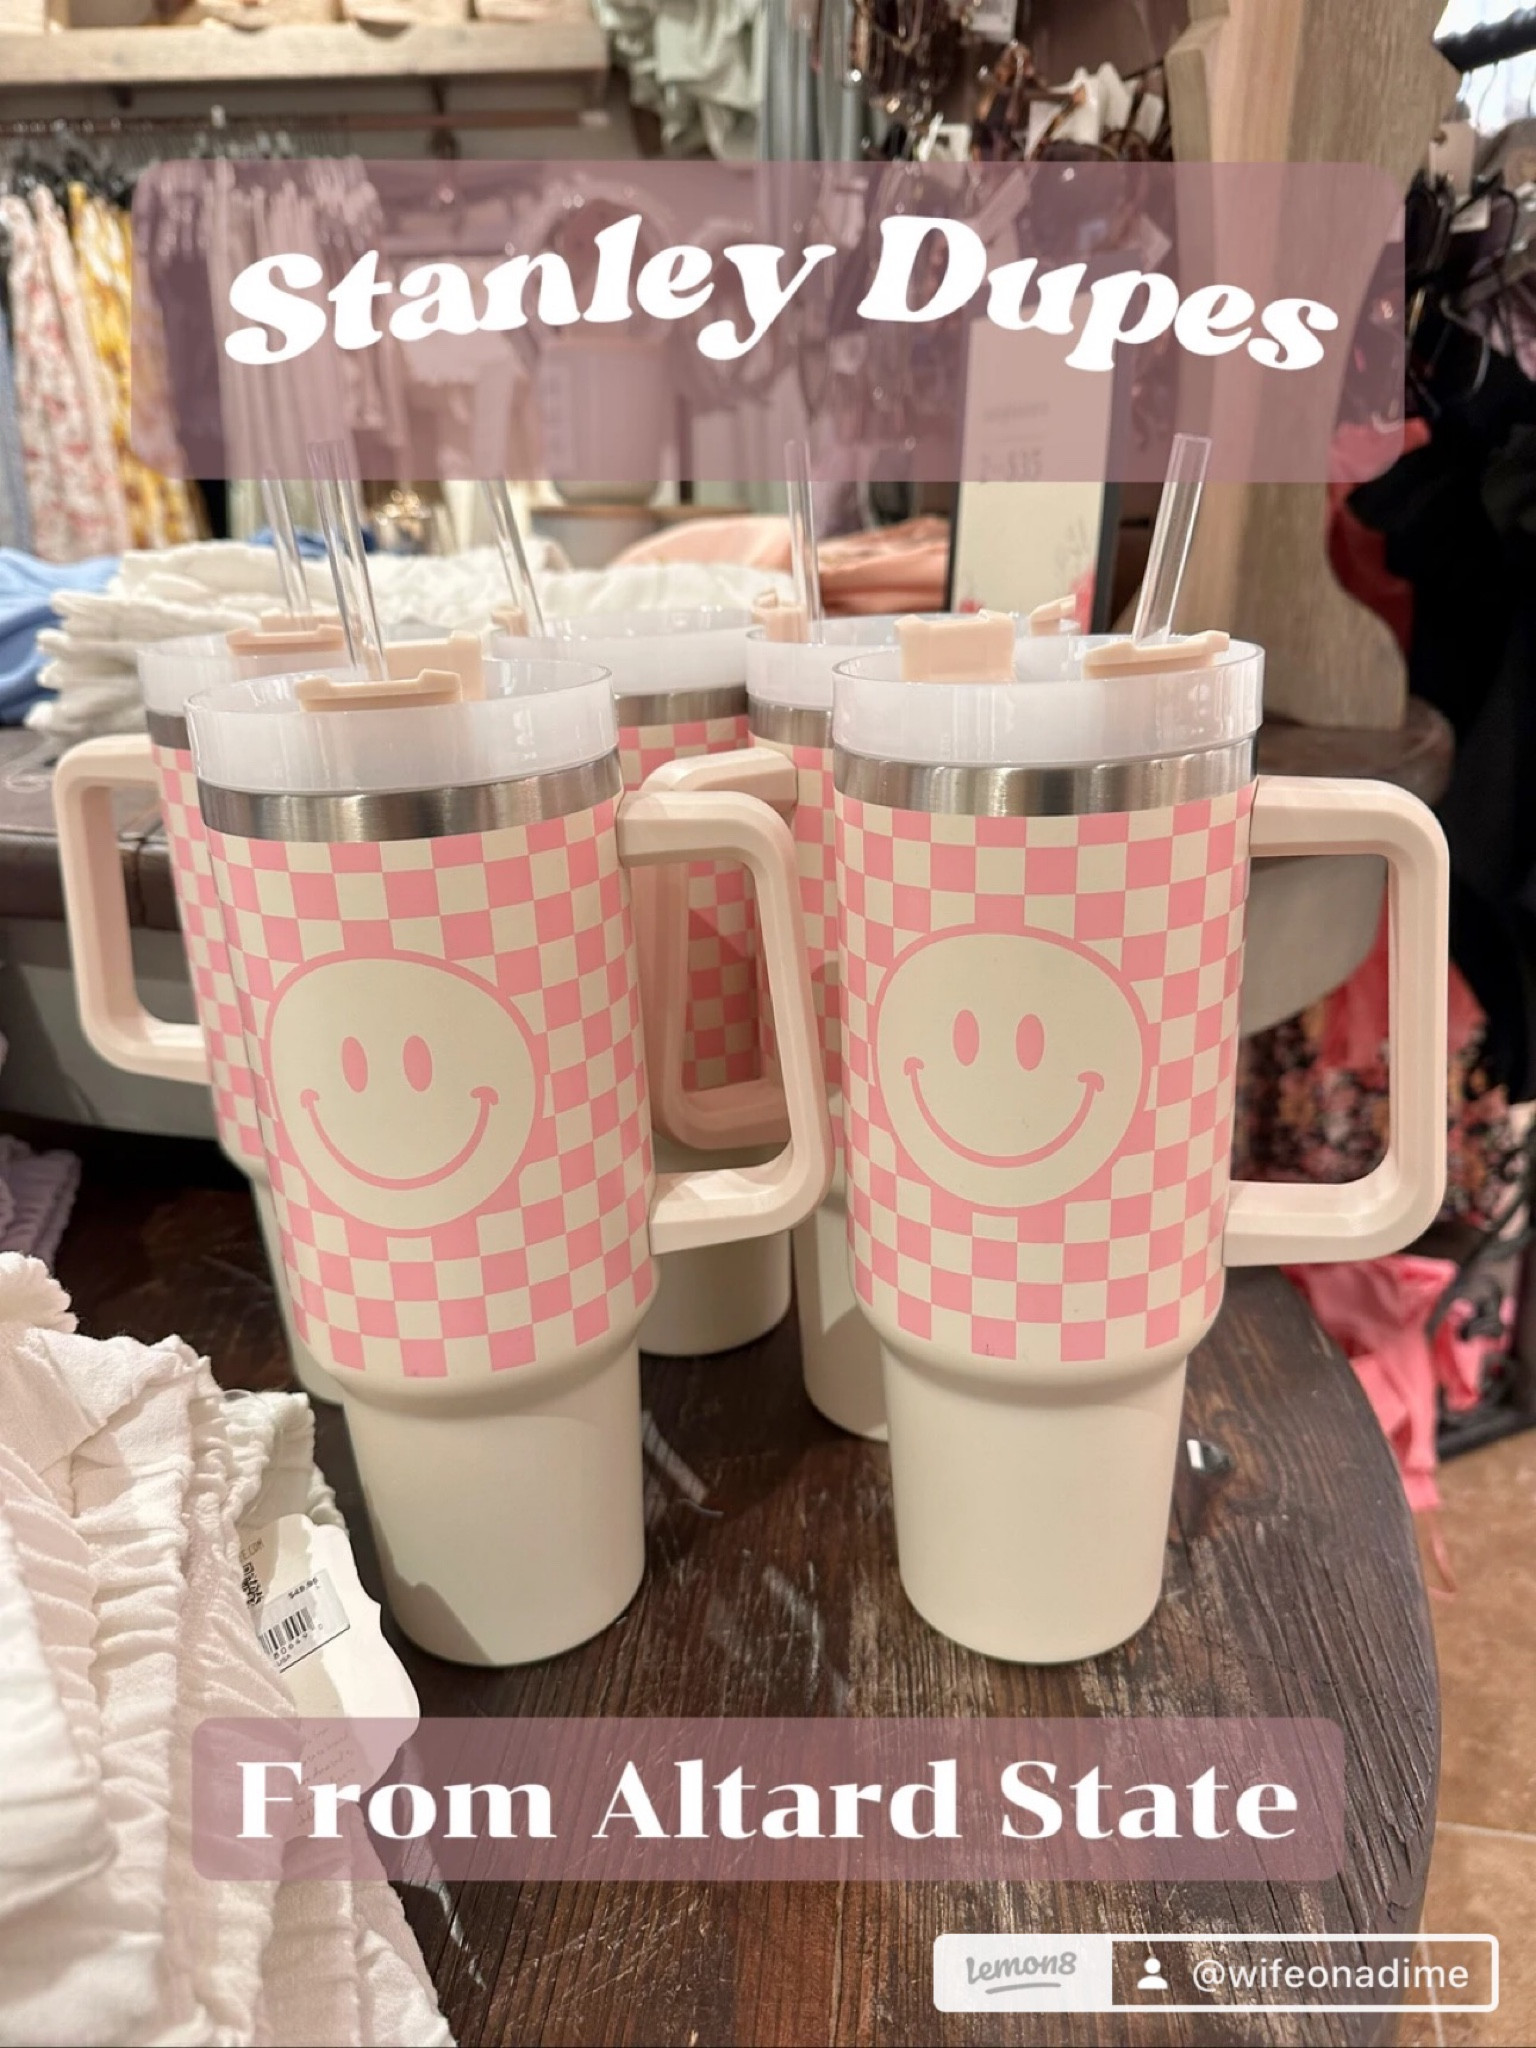 Stanley Cup: DUPE, Gallery posted by sadie sweats